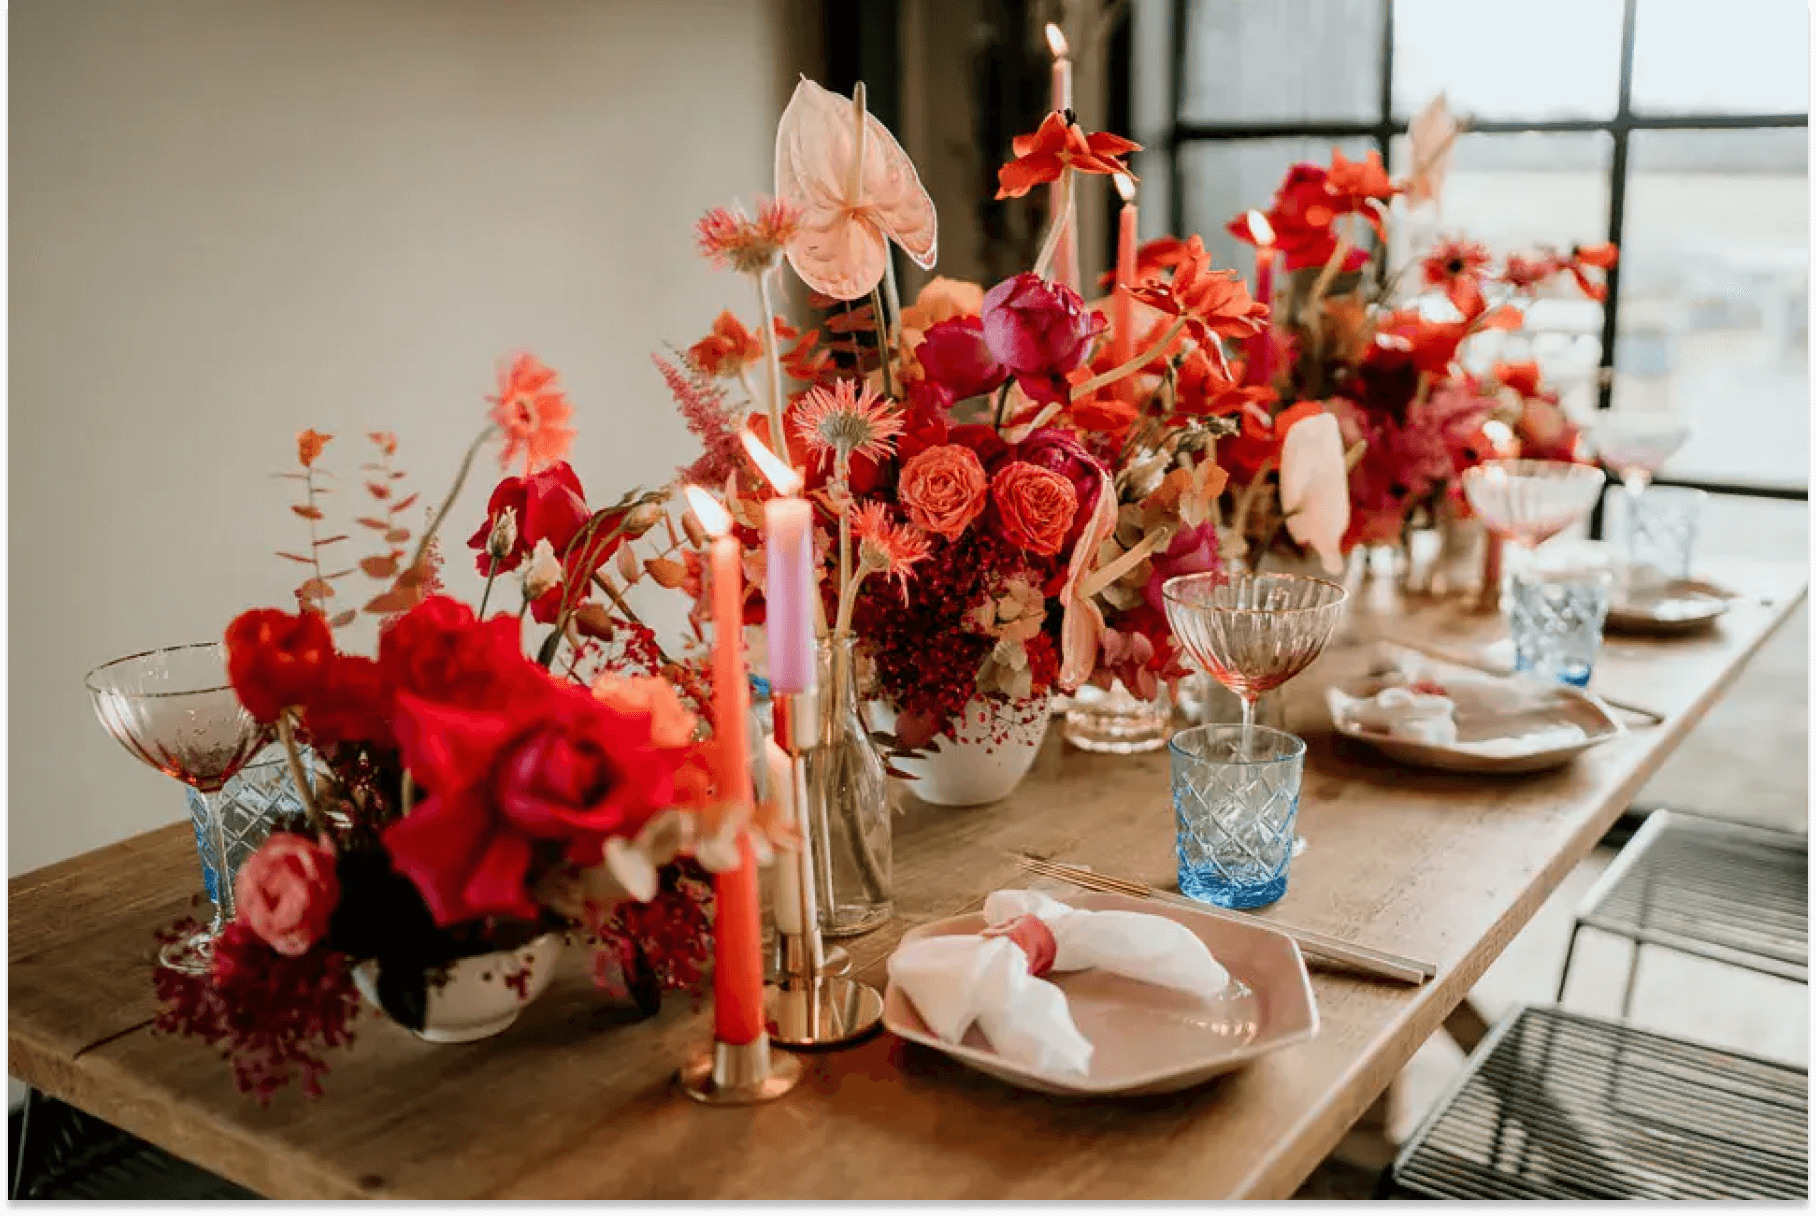 Bright red and pink floral design on a bare wooden table set with pink and blue dishware.